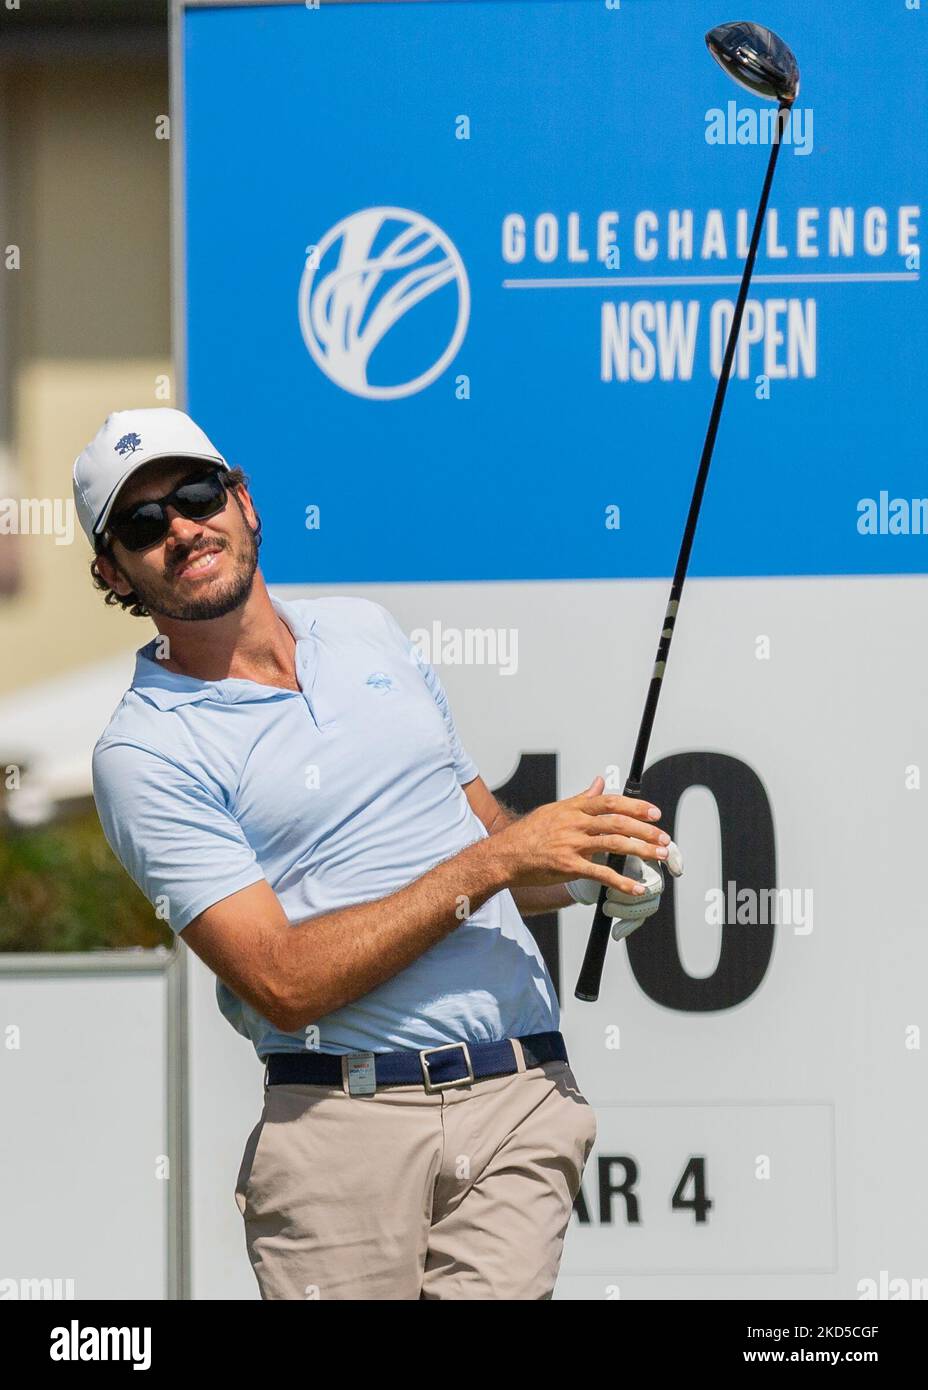 Matt Jager of Australia plays his tee shot on the 10th hole during the Round 2 of the 2022 NSW Open at Concord Golf Club on March 18, 2022 in Sydney, Australia. ( Editorial use only) Stock Photo